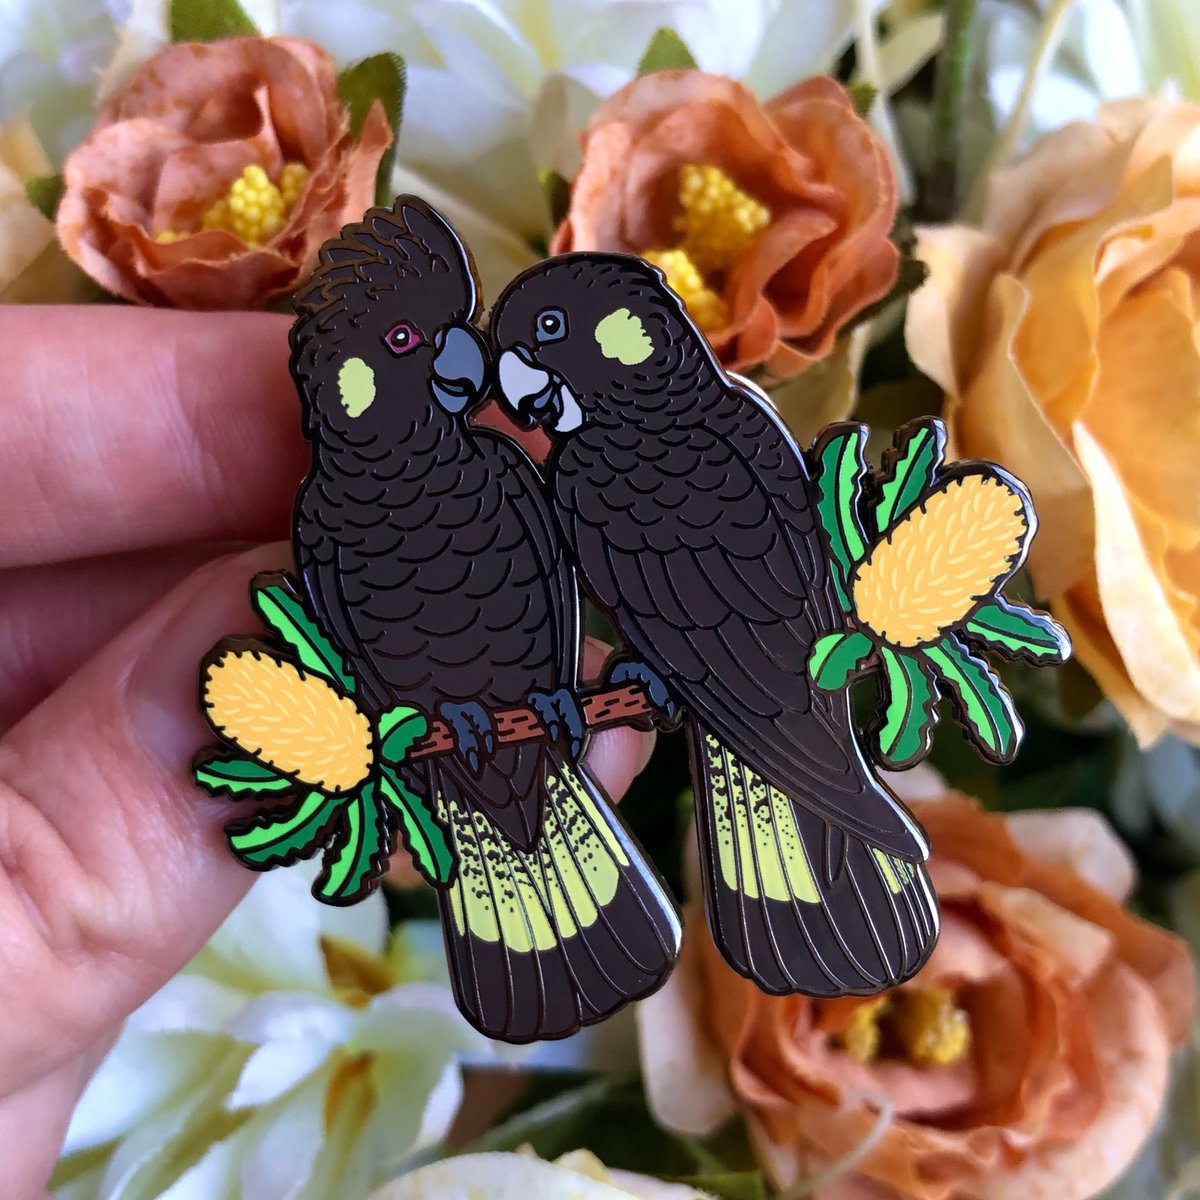 Yellow-tailed Black Cockatoos 🖤💛 we are lucky to have these beauties in our area, you can hear their flock calls for miles! Check our whole collection of Wild Cockatoo pins in our shop! . Hyperfinch.com